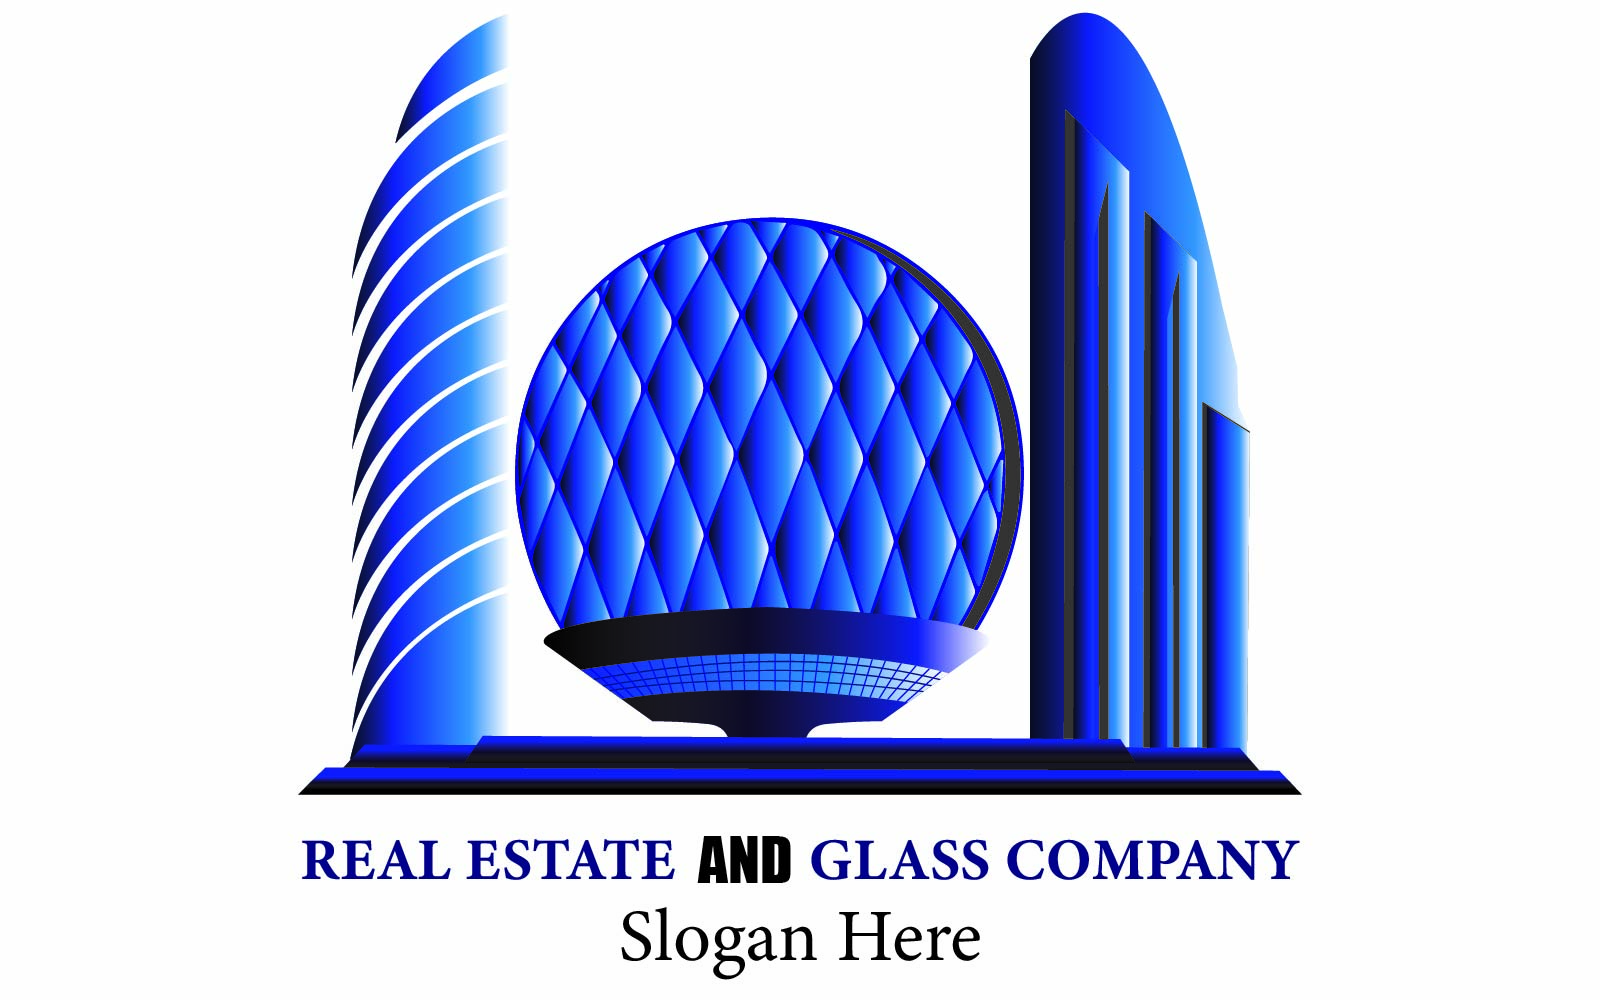 Real Estate And Glass Company